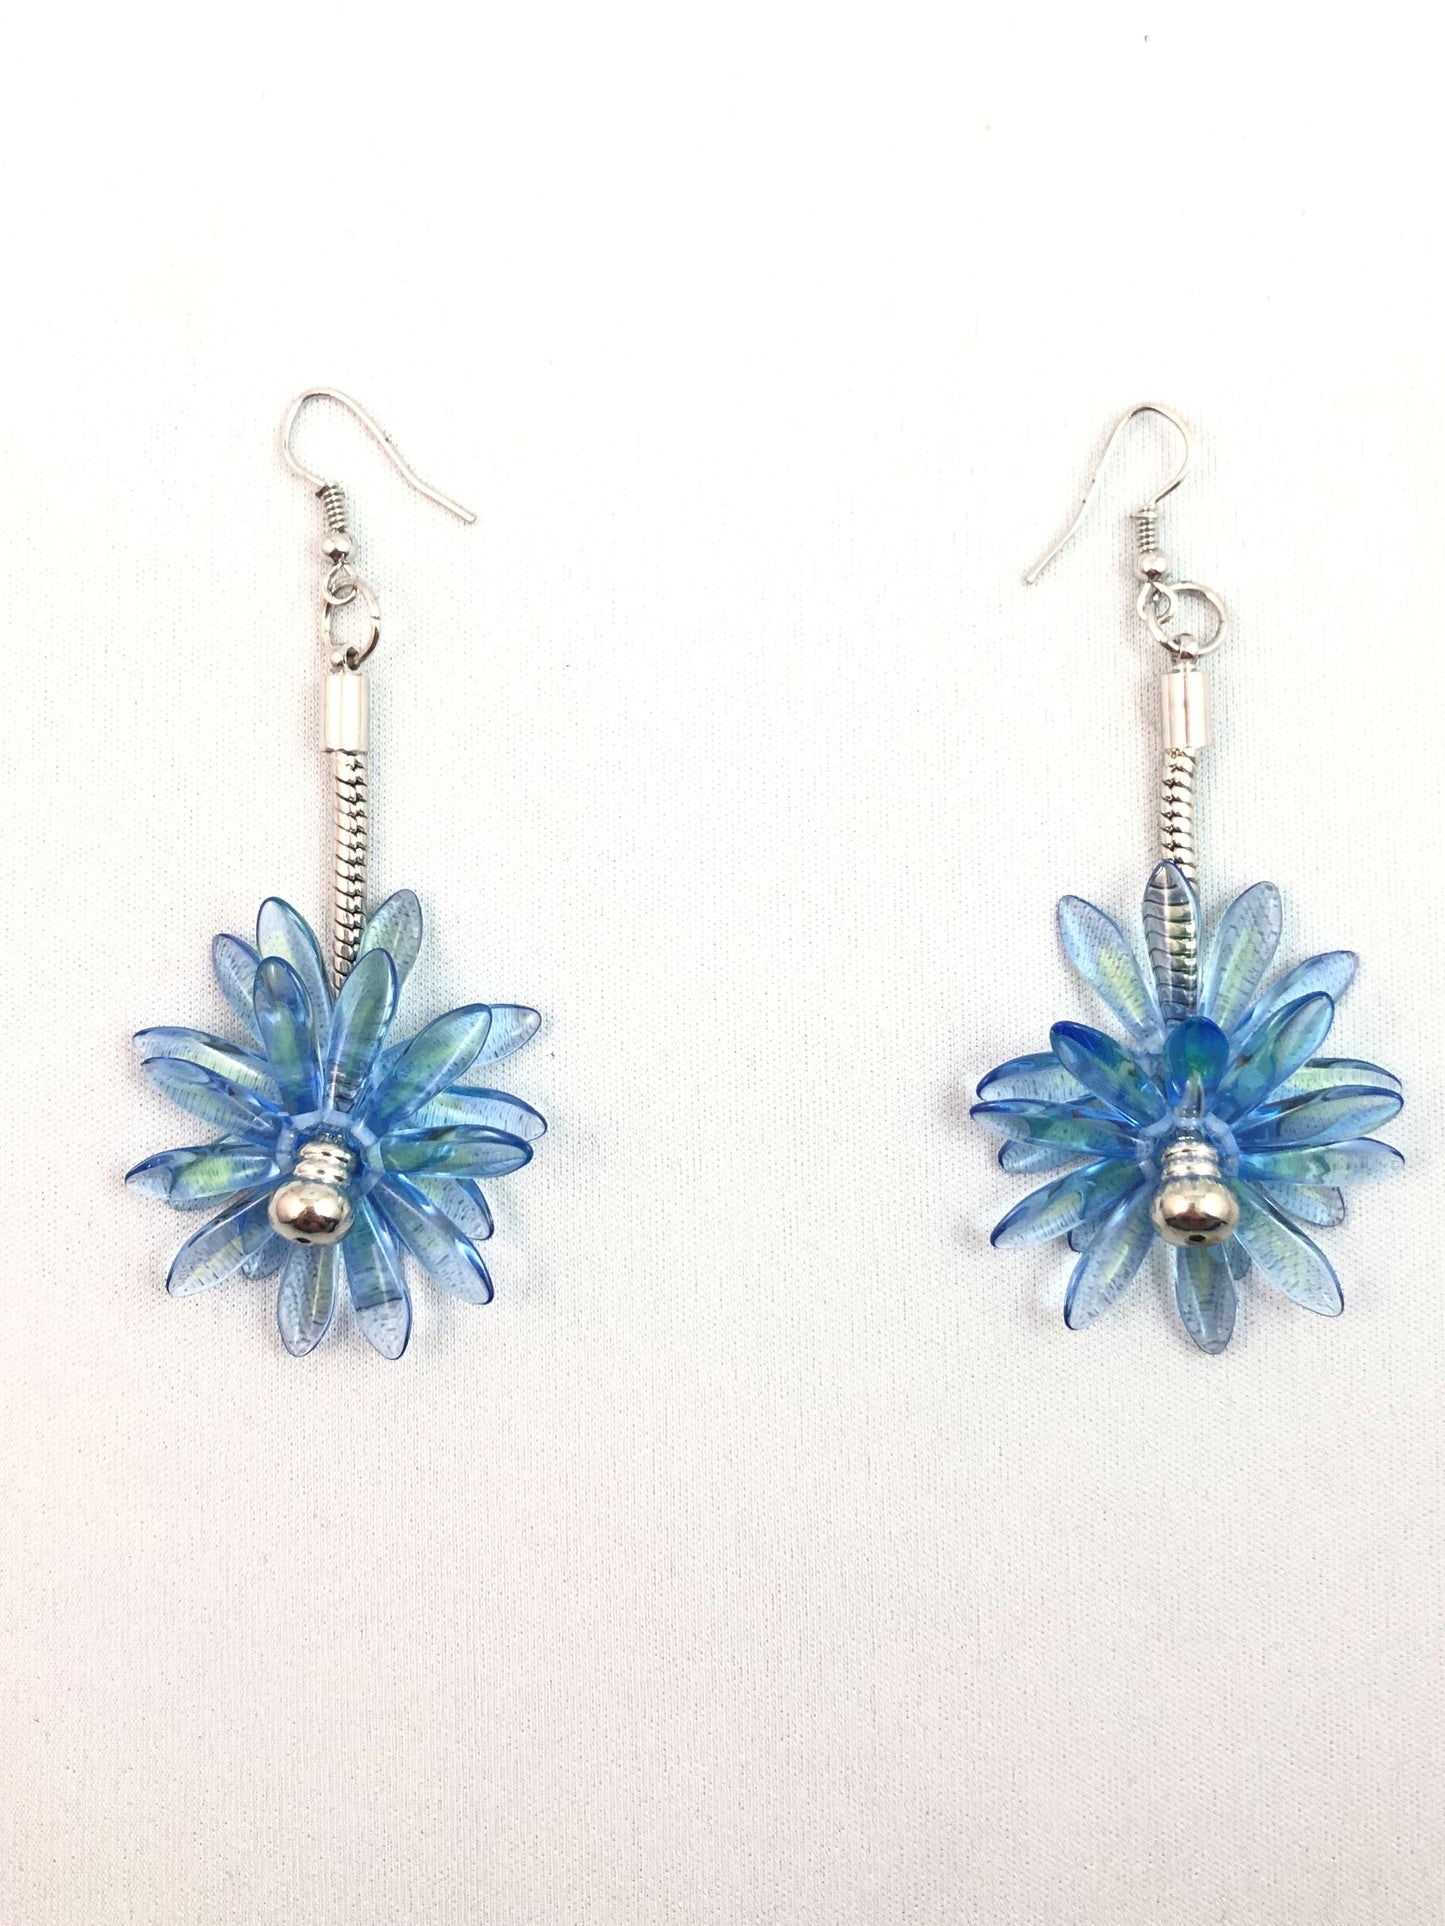 Czech Handmade Blue Cluster Dangle Earrings - Le Prix Fashion & Consulting